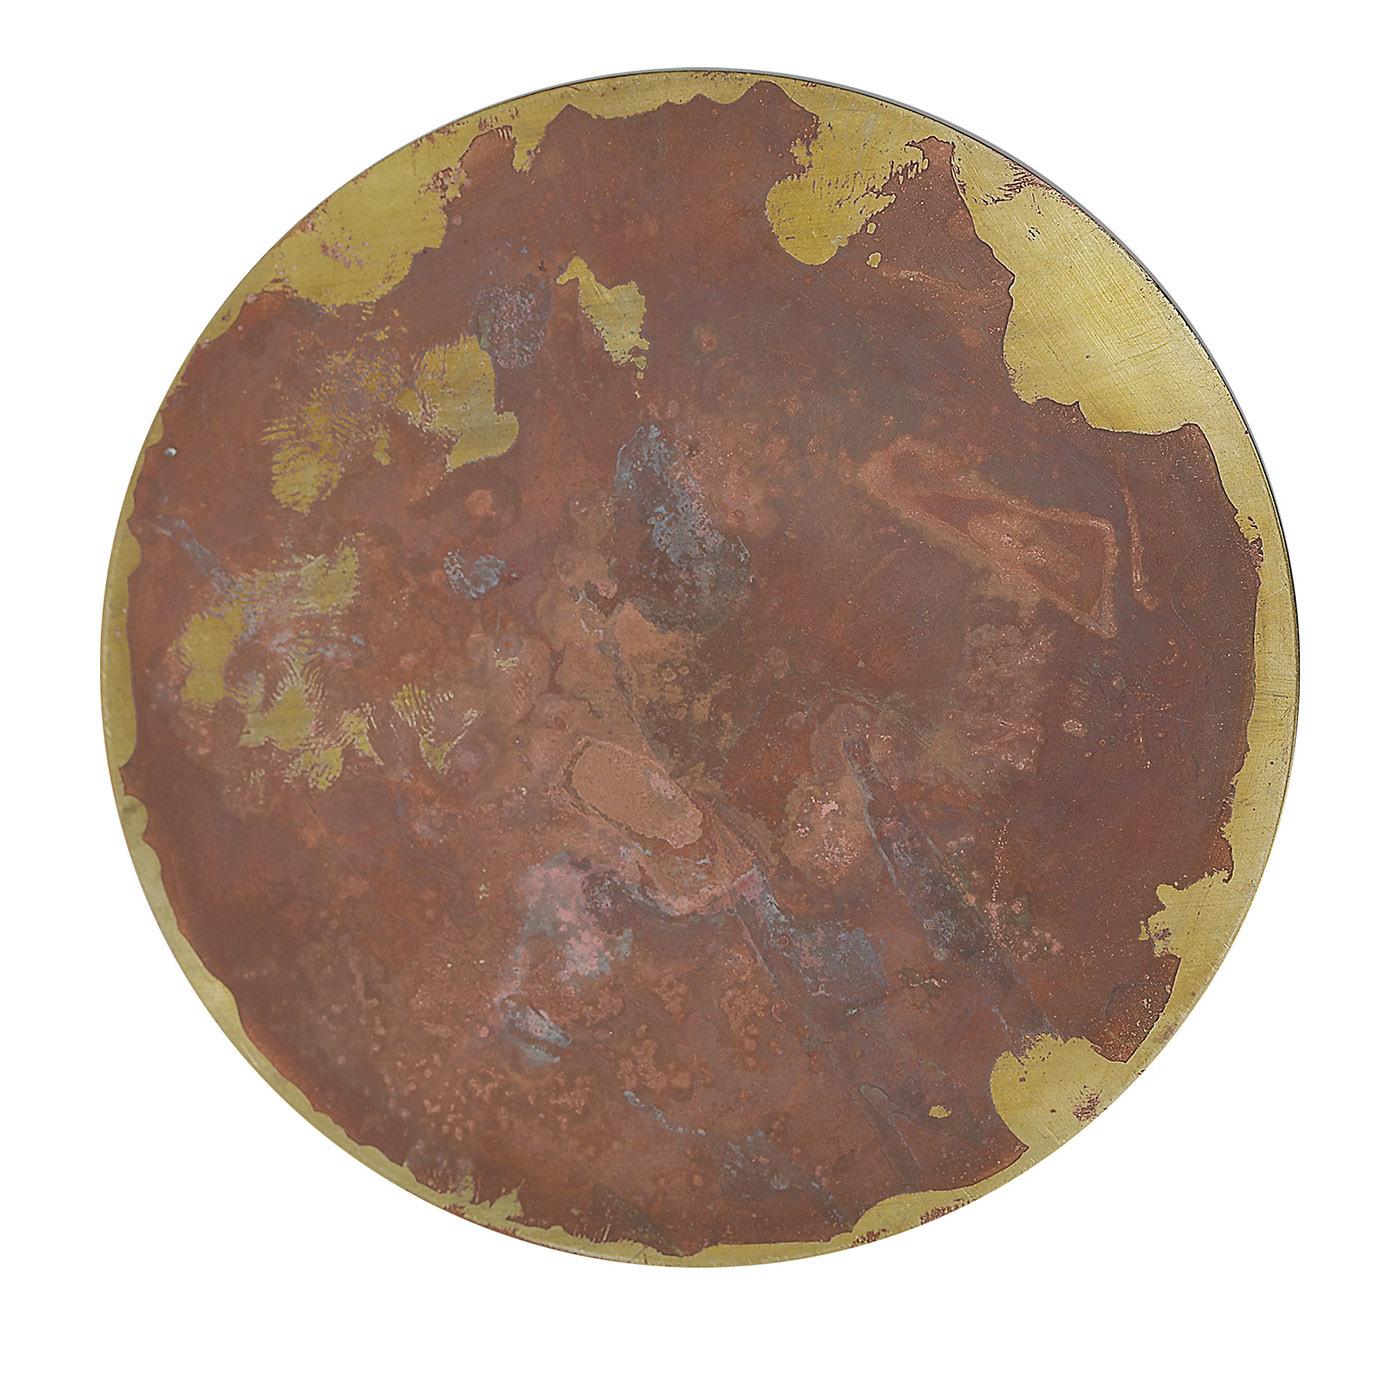 This stunning set of six coasters showcases a corroded texture whose unique traceries and hues result from the interaction between acids and oxides with brass. Part of the Geografie Emozionali Collection, the coasters' back are upholstered with a